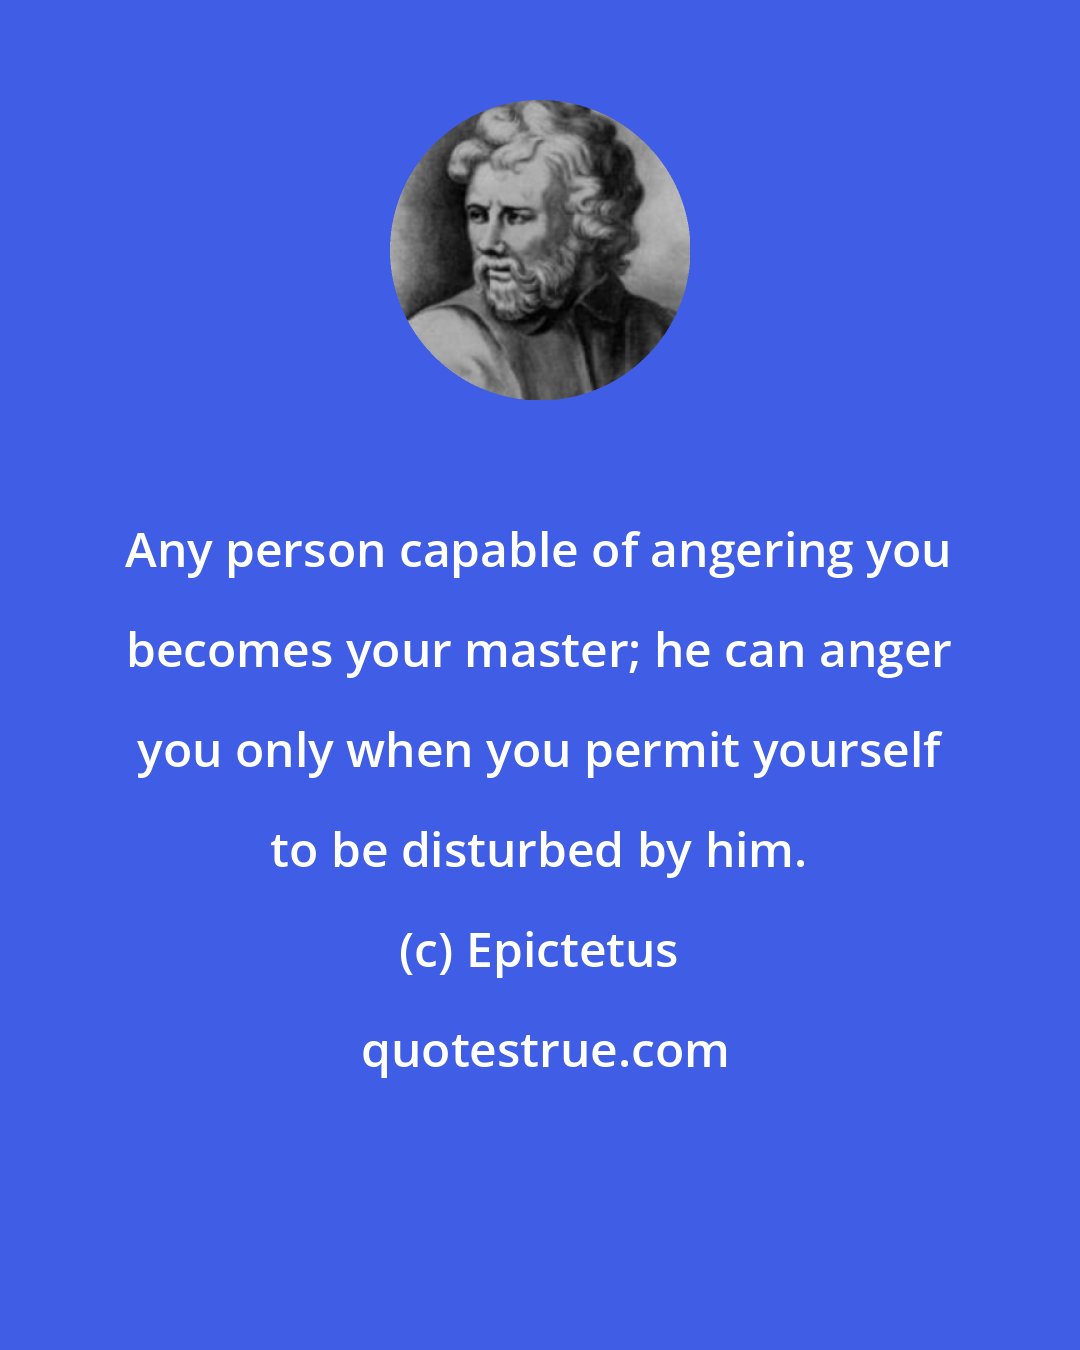 Epictetus: Any person capable of angering you becomes your master; he can anger you only when you permit yourself to be disturbed by him.